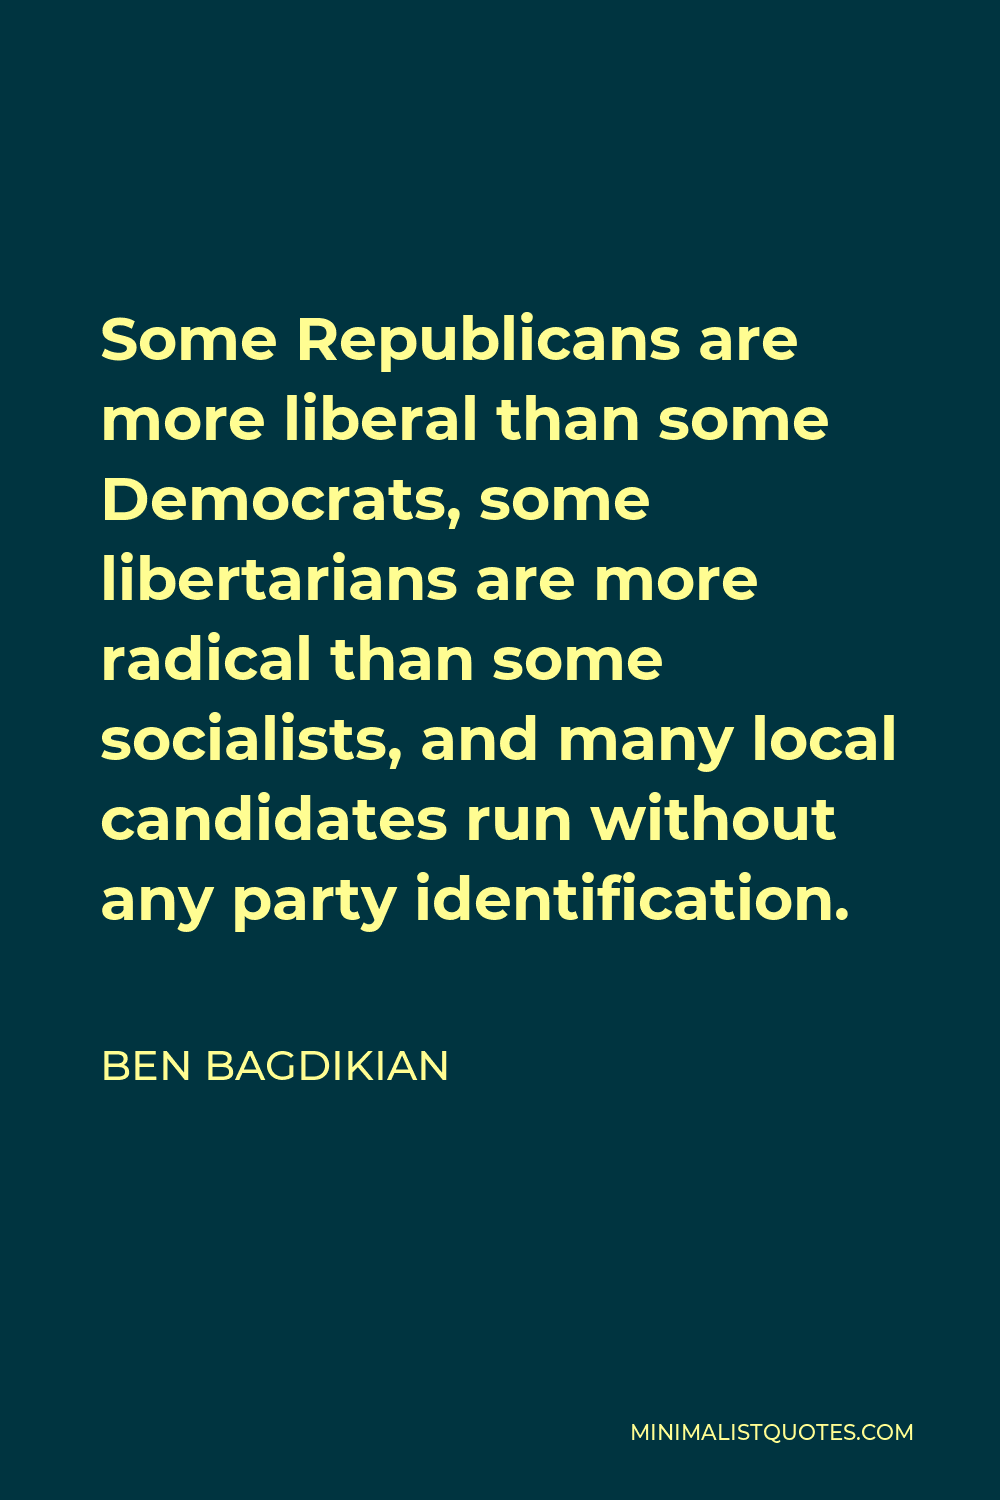 Ben Bagdikian Quote - Some Republicans are more liberal than some Democrats, some libertarians are more radical than some socialists, and many local candidates run without any party identification.